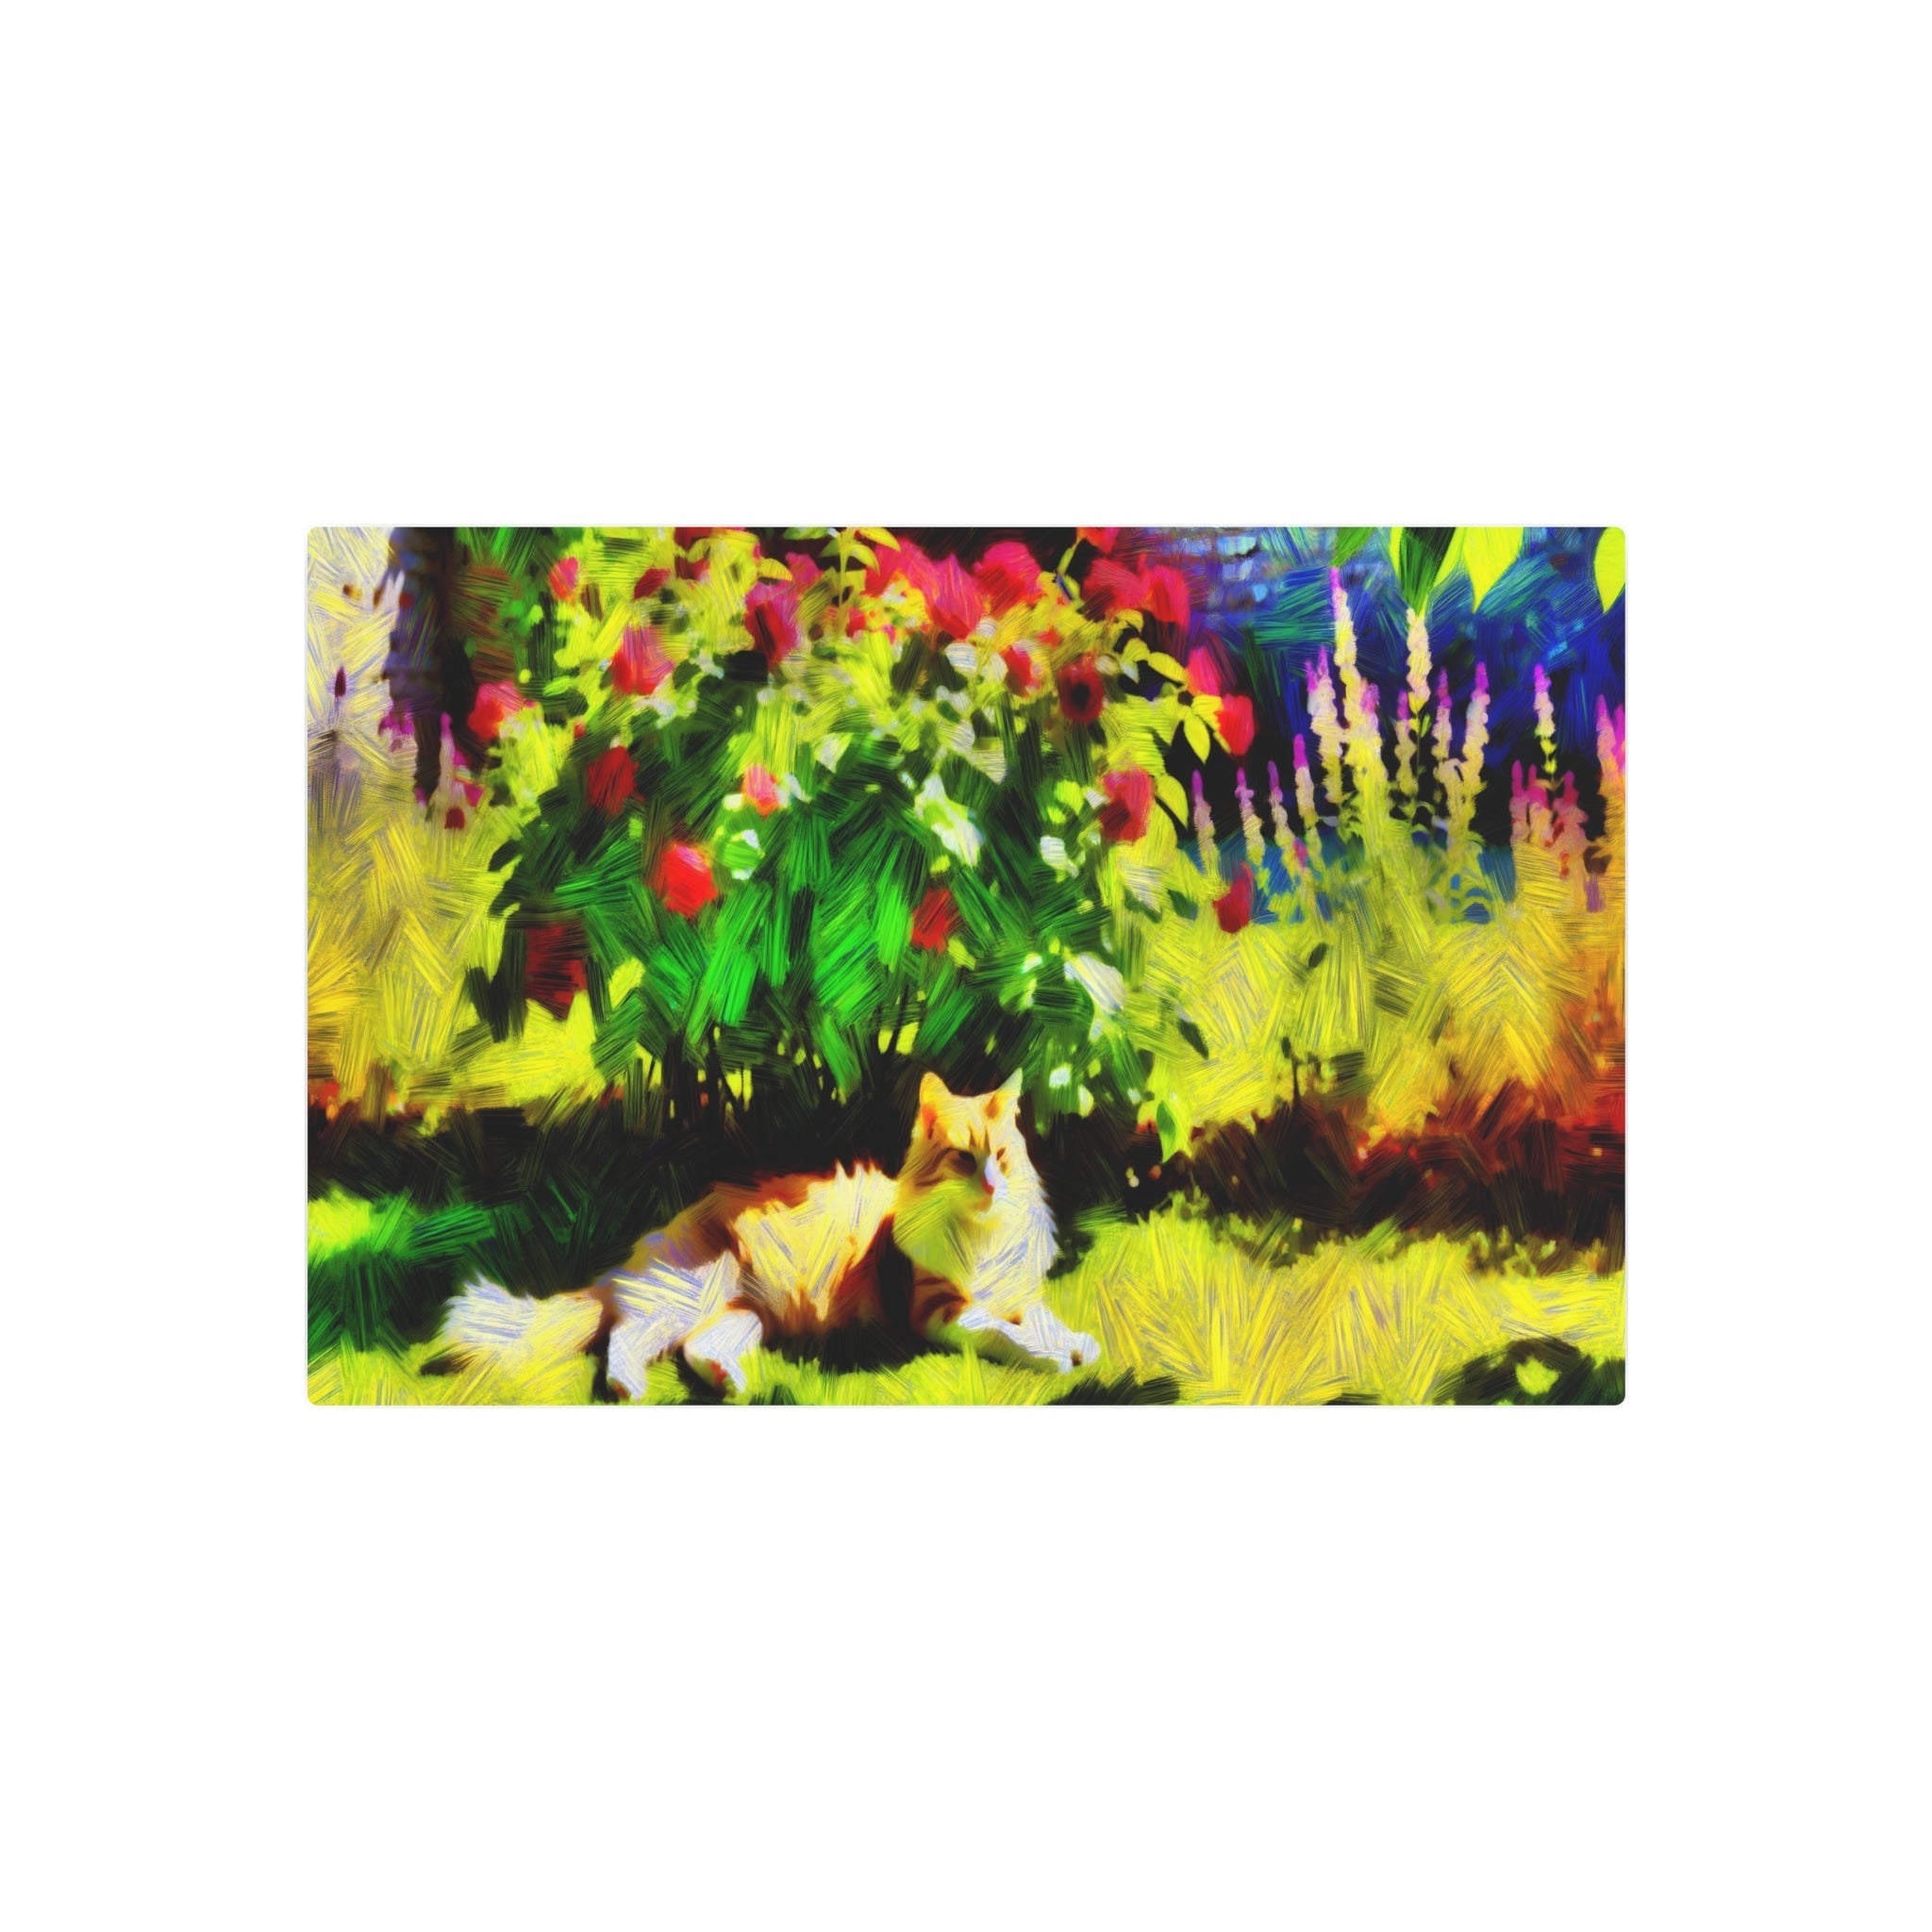 Metal Poster Art | "Impressionist Style Western Art - Sunlit Garden Scene with Cat amid Blooming Flowers" - Metal Poster Art 30″ x 20″ (Horizontal) 0.12''